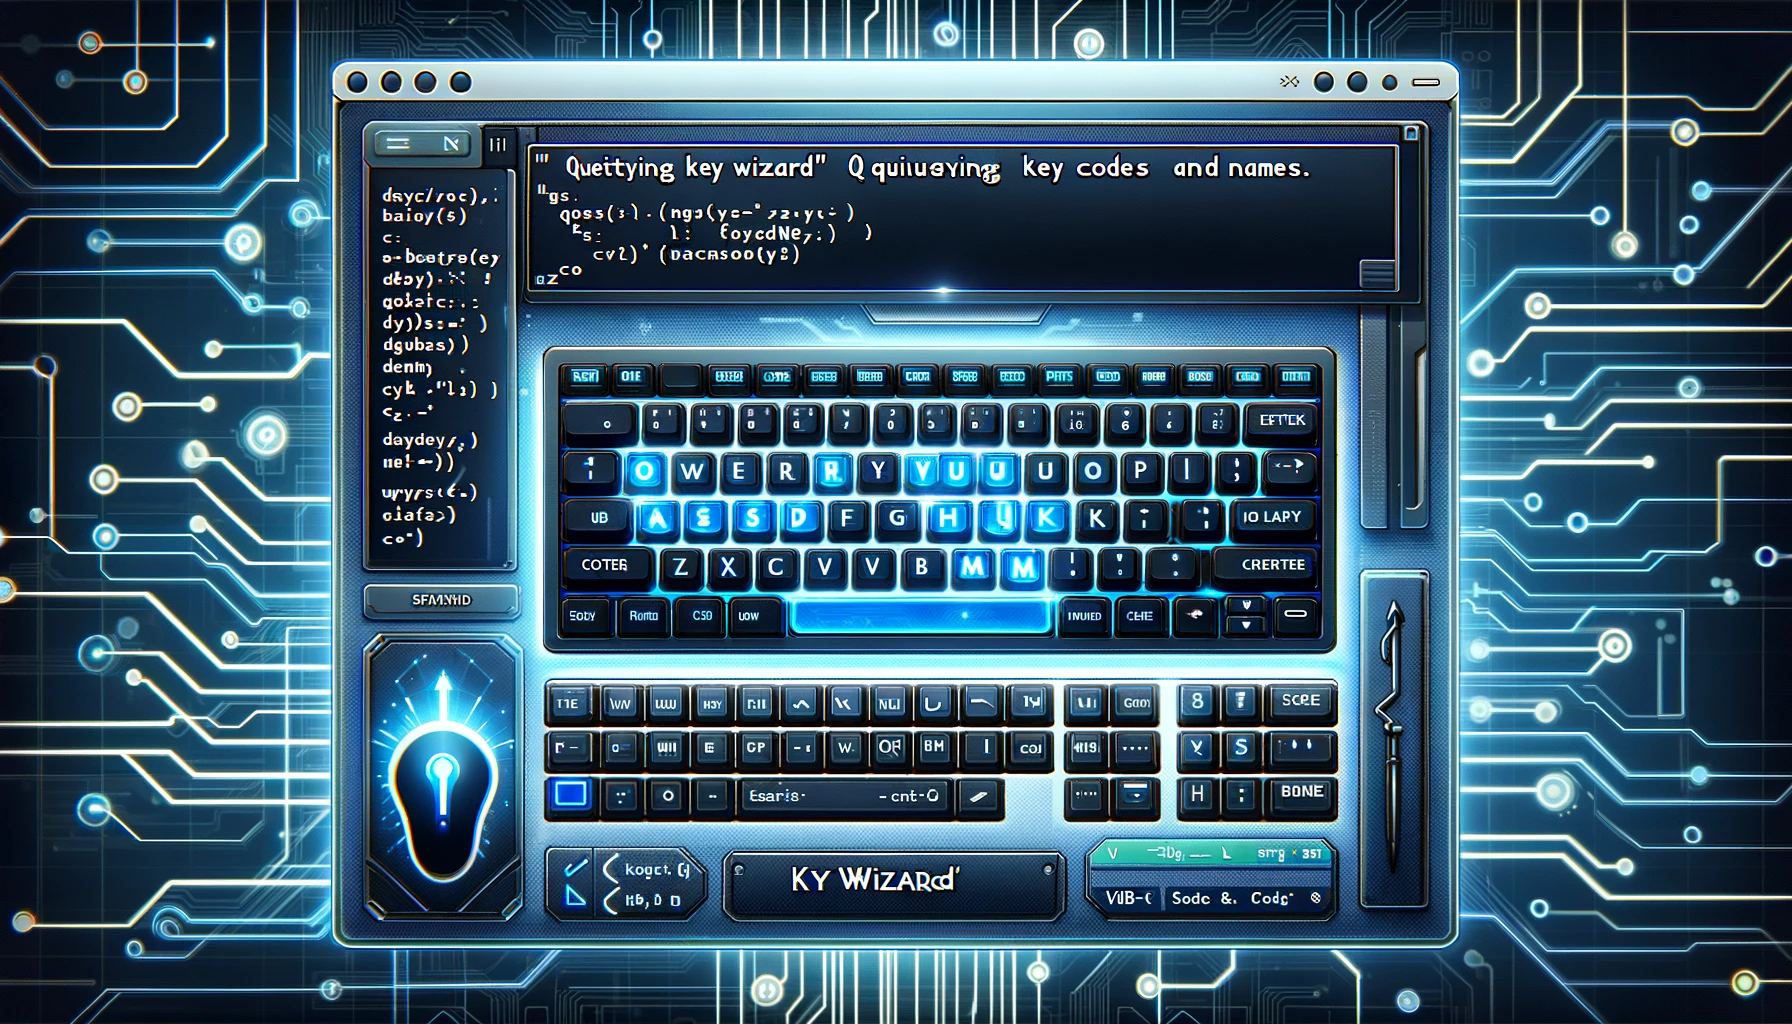 query-key-codes-names-with-key-wizard.png